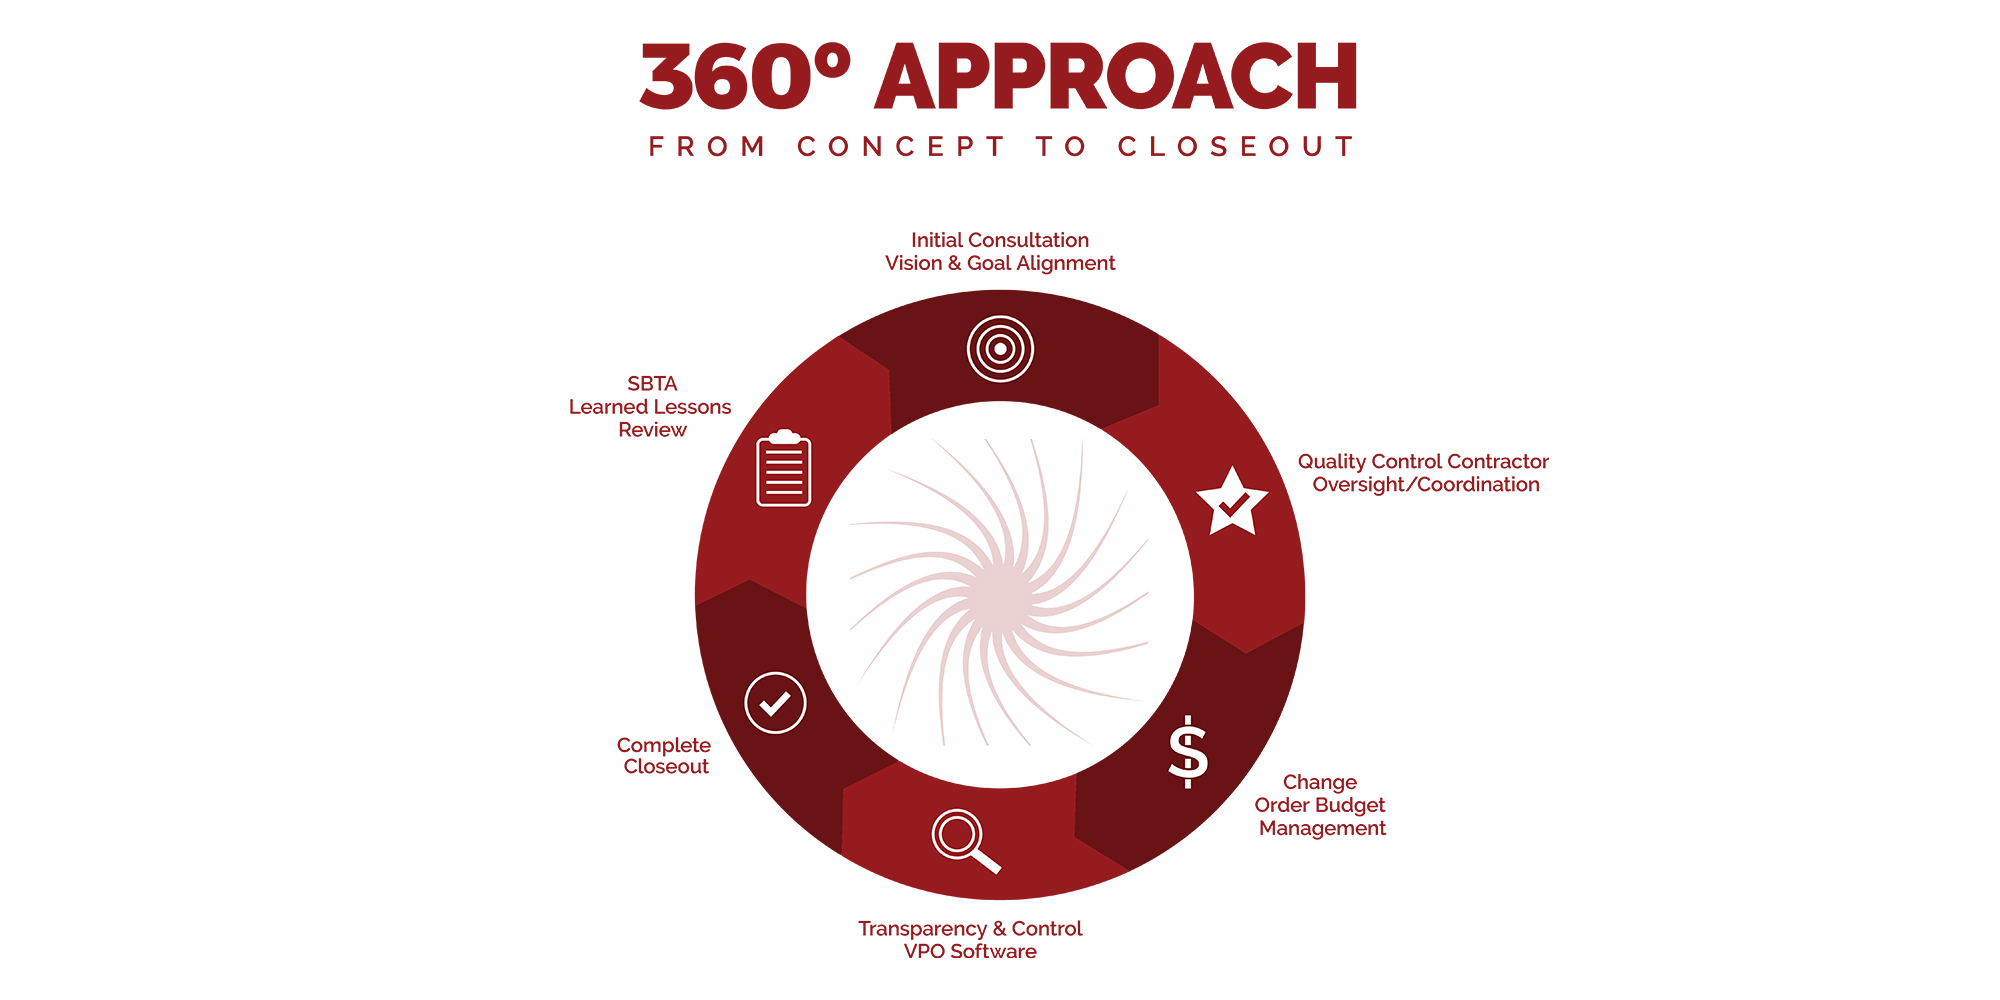 360-approach-infographic